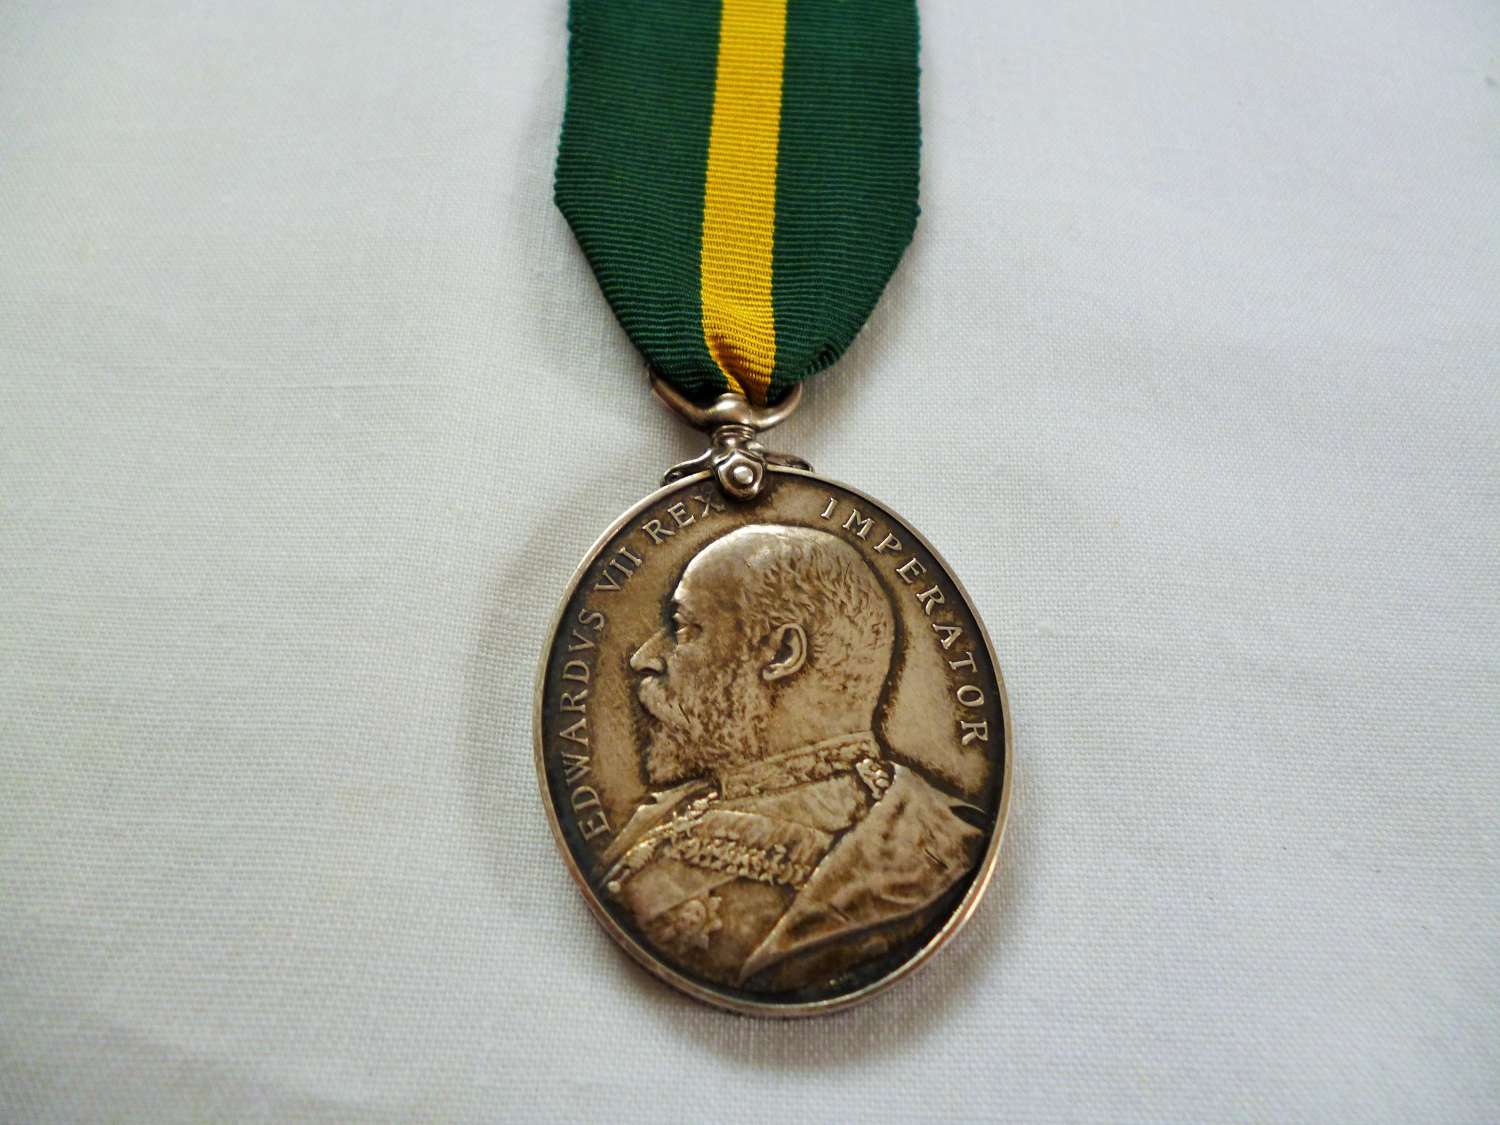 Territorial Force Efficiency Medal, E.VII.R.